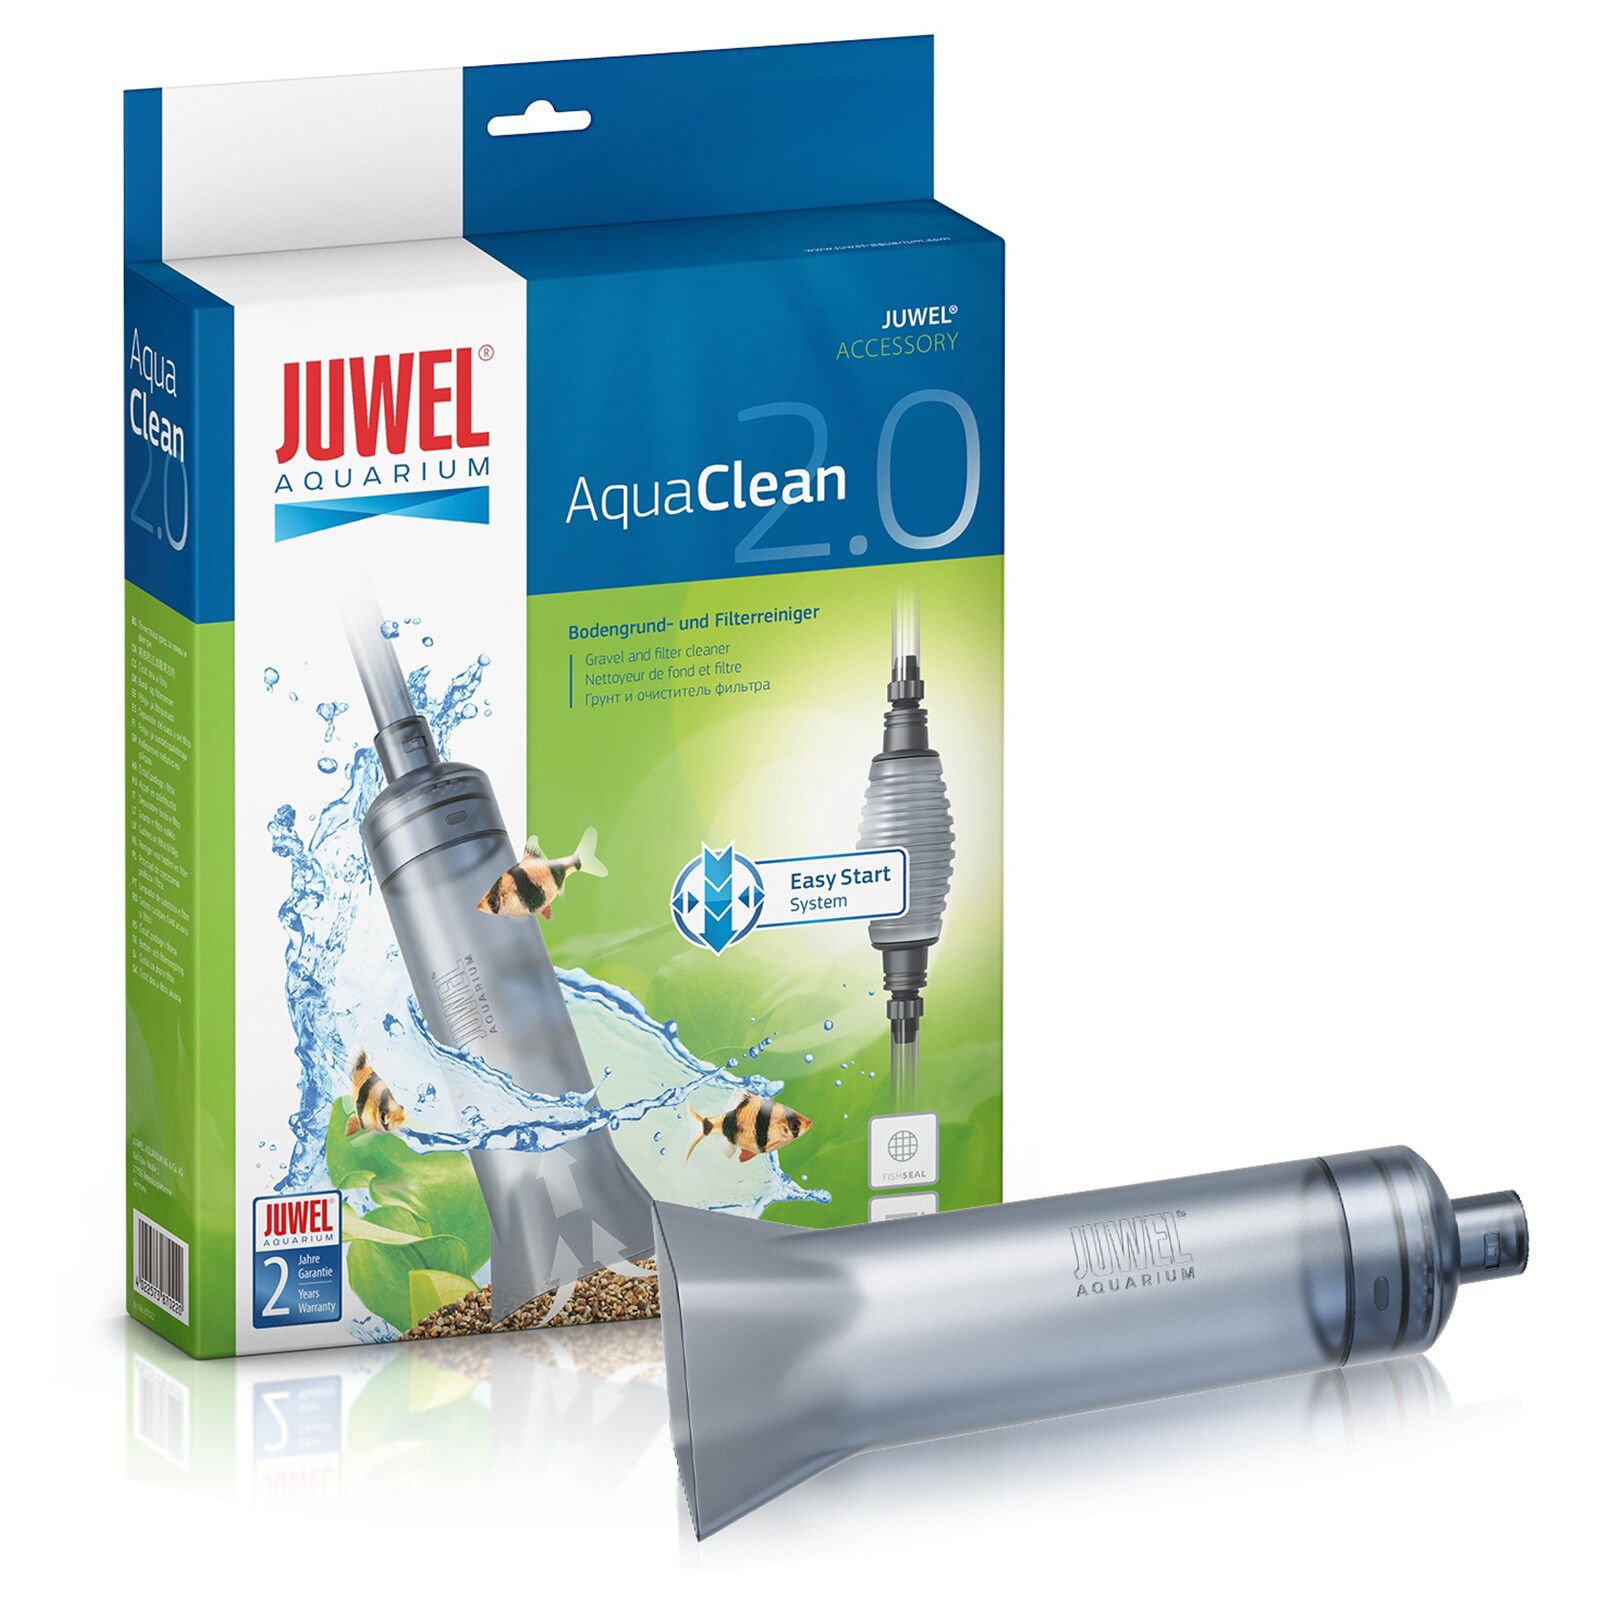 Juwel - Aqua Clean 2.0 - Filter and Ground Material Cleaner